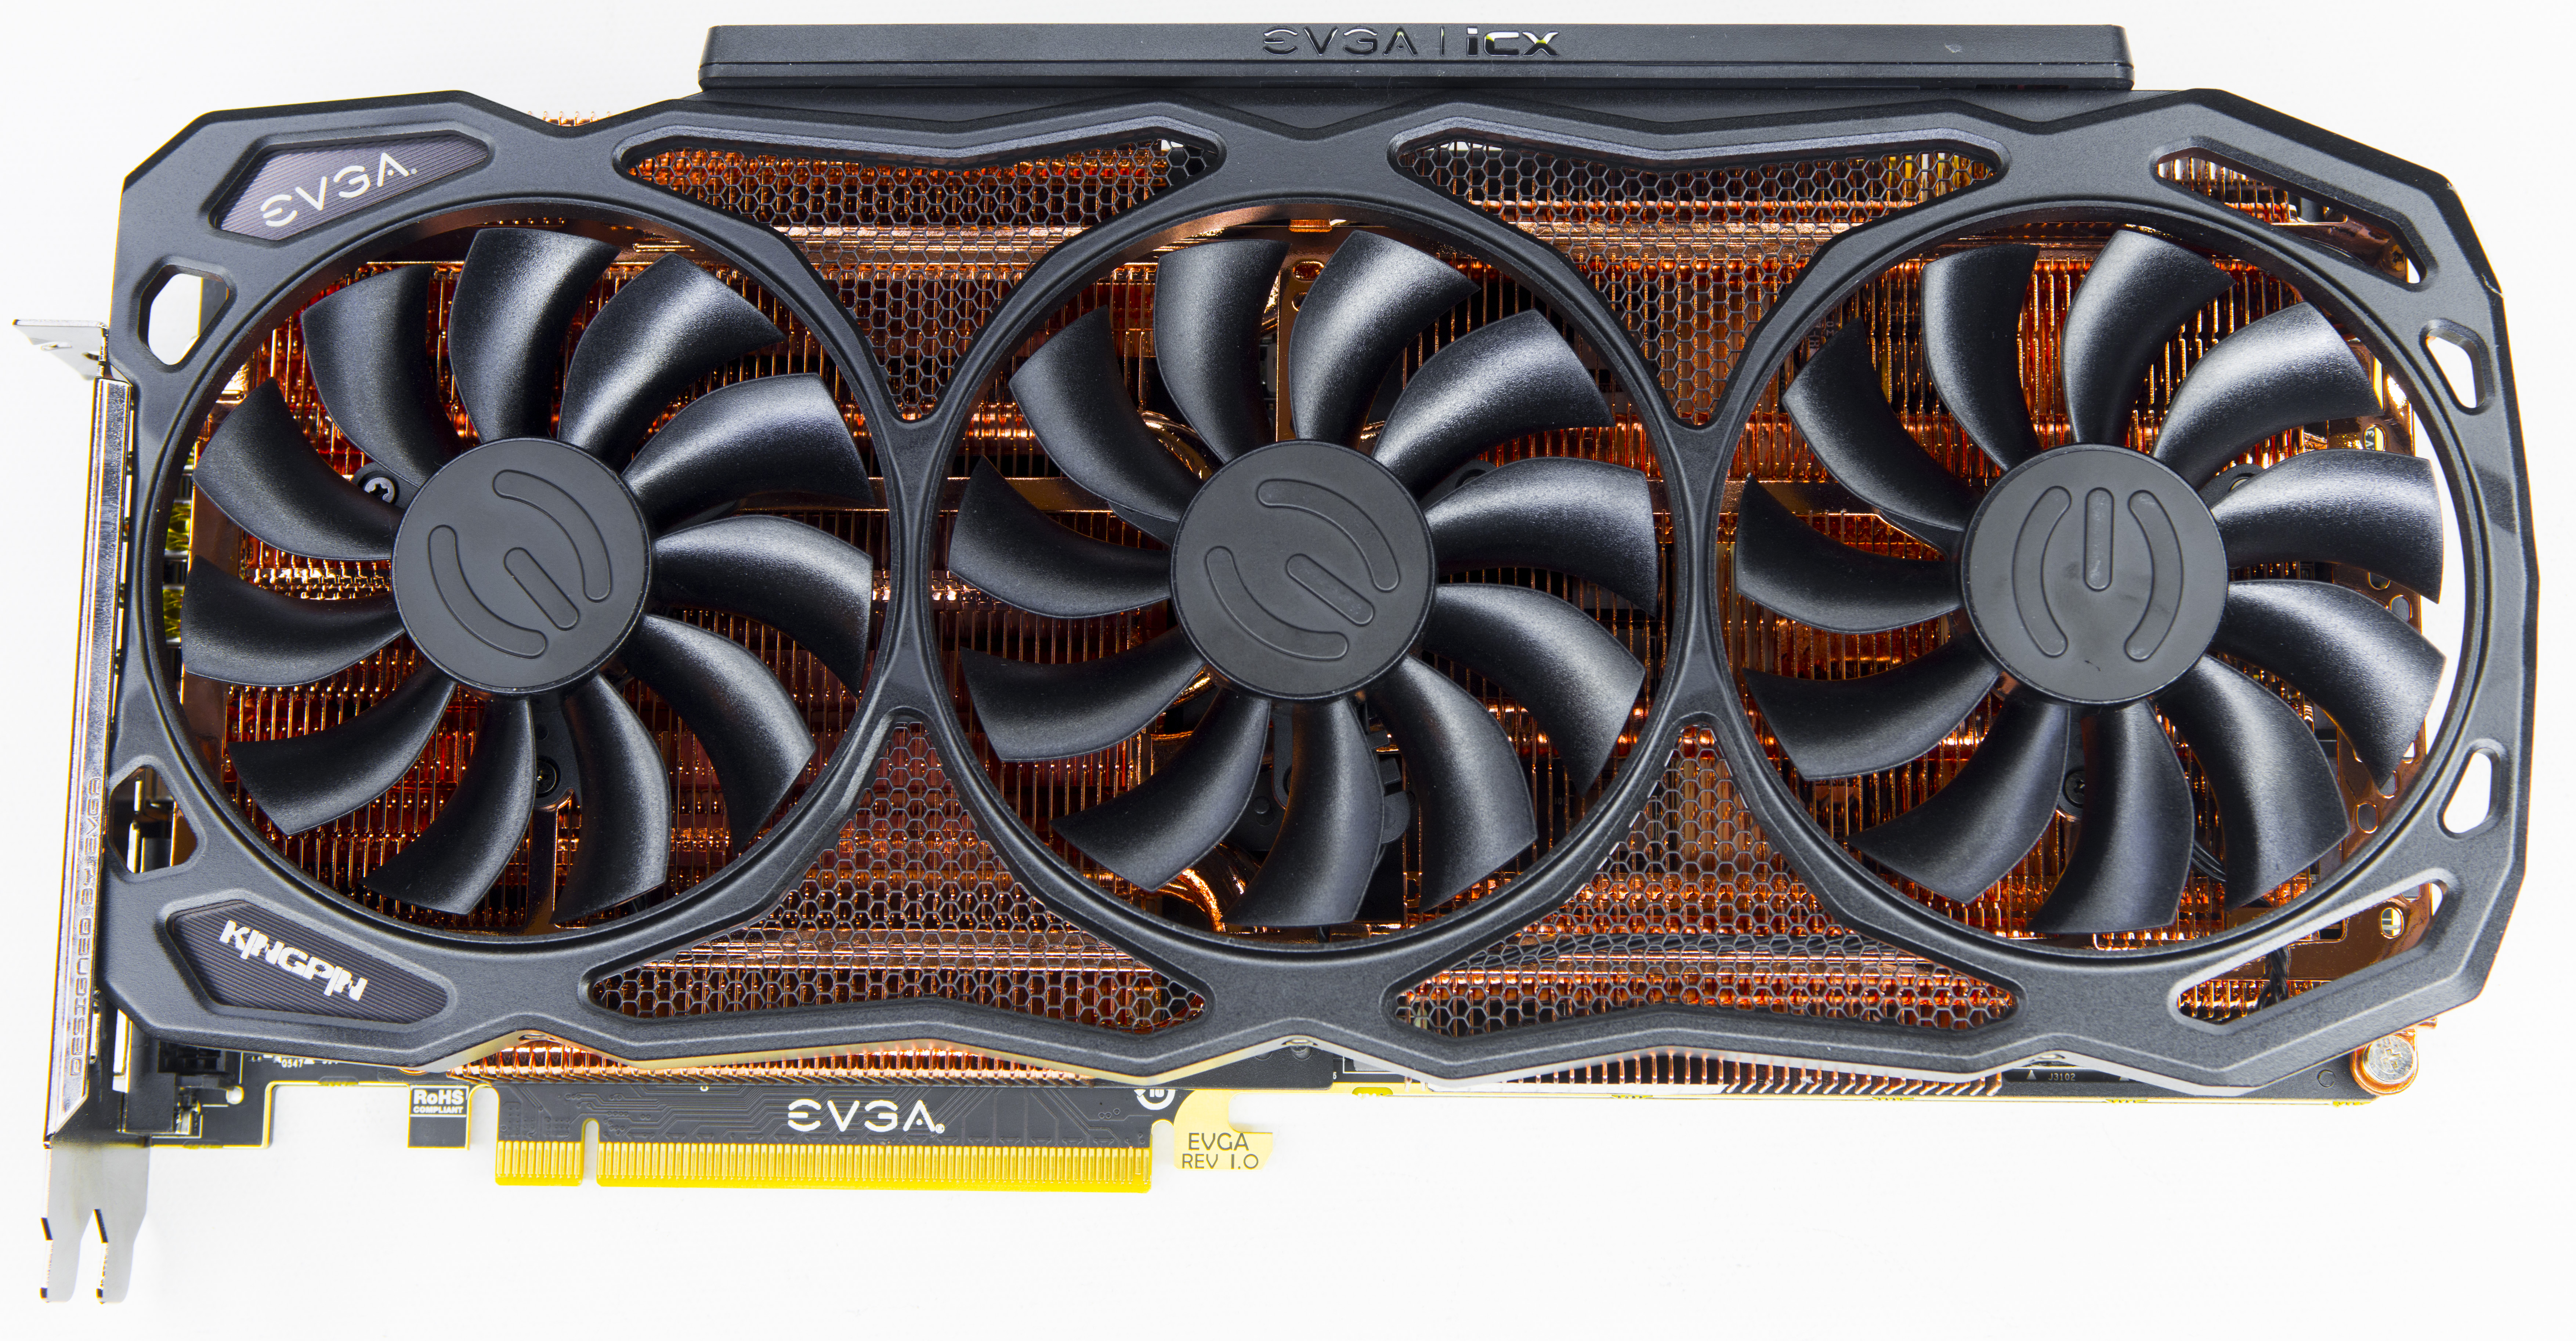 xDevs.com | Extreme Guide for EVGA GeForce GTX 1080 Ti K|NGP|N Edition graphics card